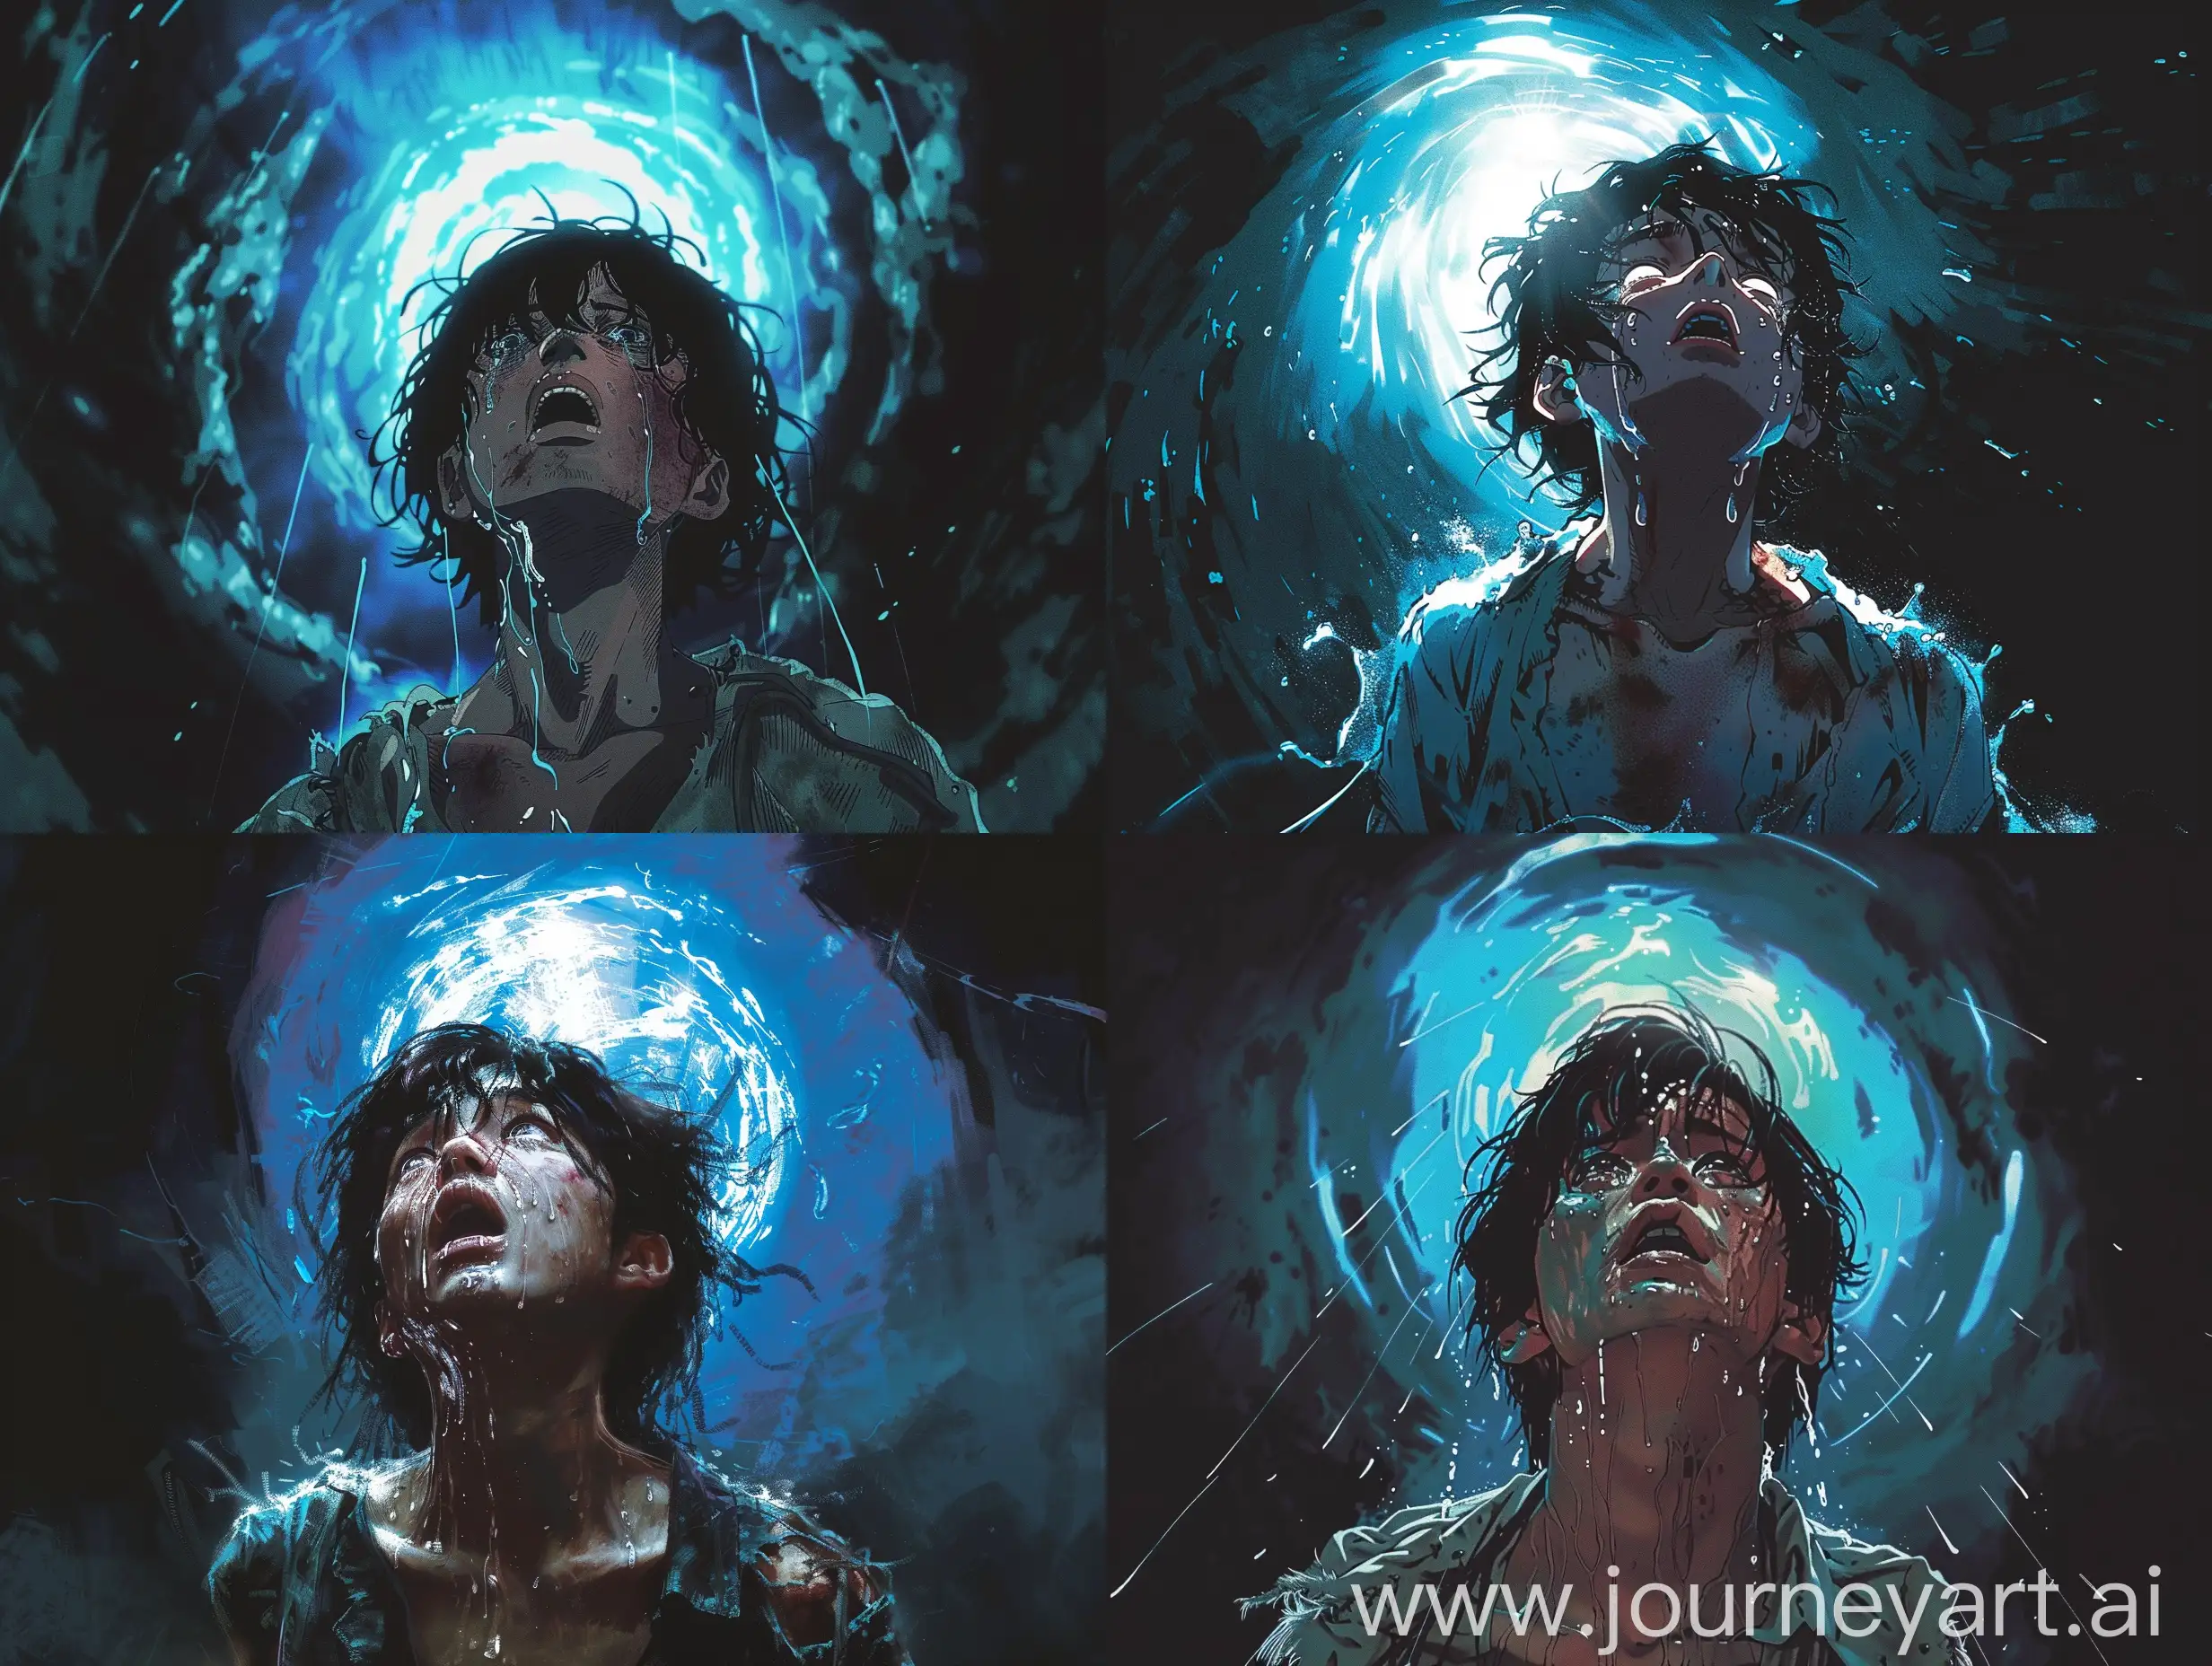 A dark, anime-style movie poster in the style of Satoshi Kon, featuring a character looking upwards, illuminated by a glowing blue vortex in the background. The character has wet hair and tattered clothes, with an expression filled with intense emotion. 